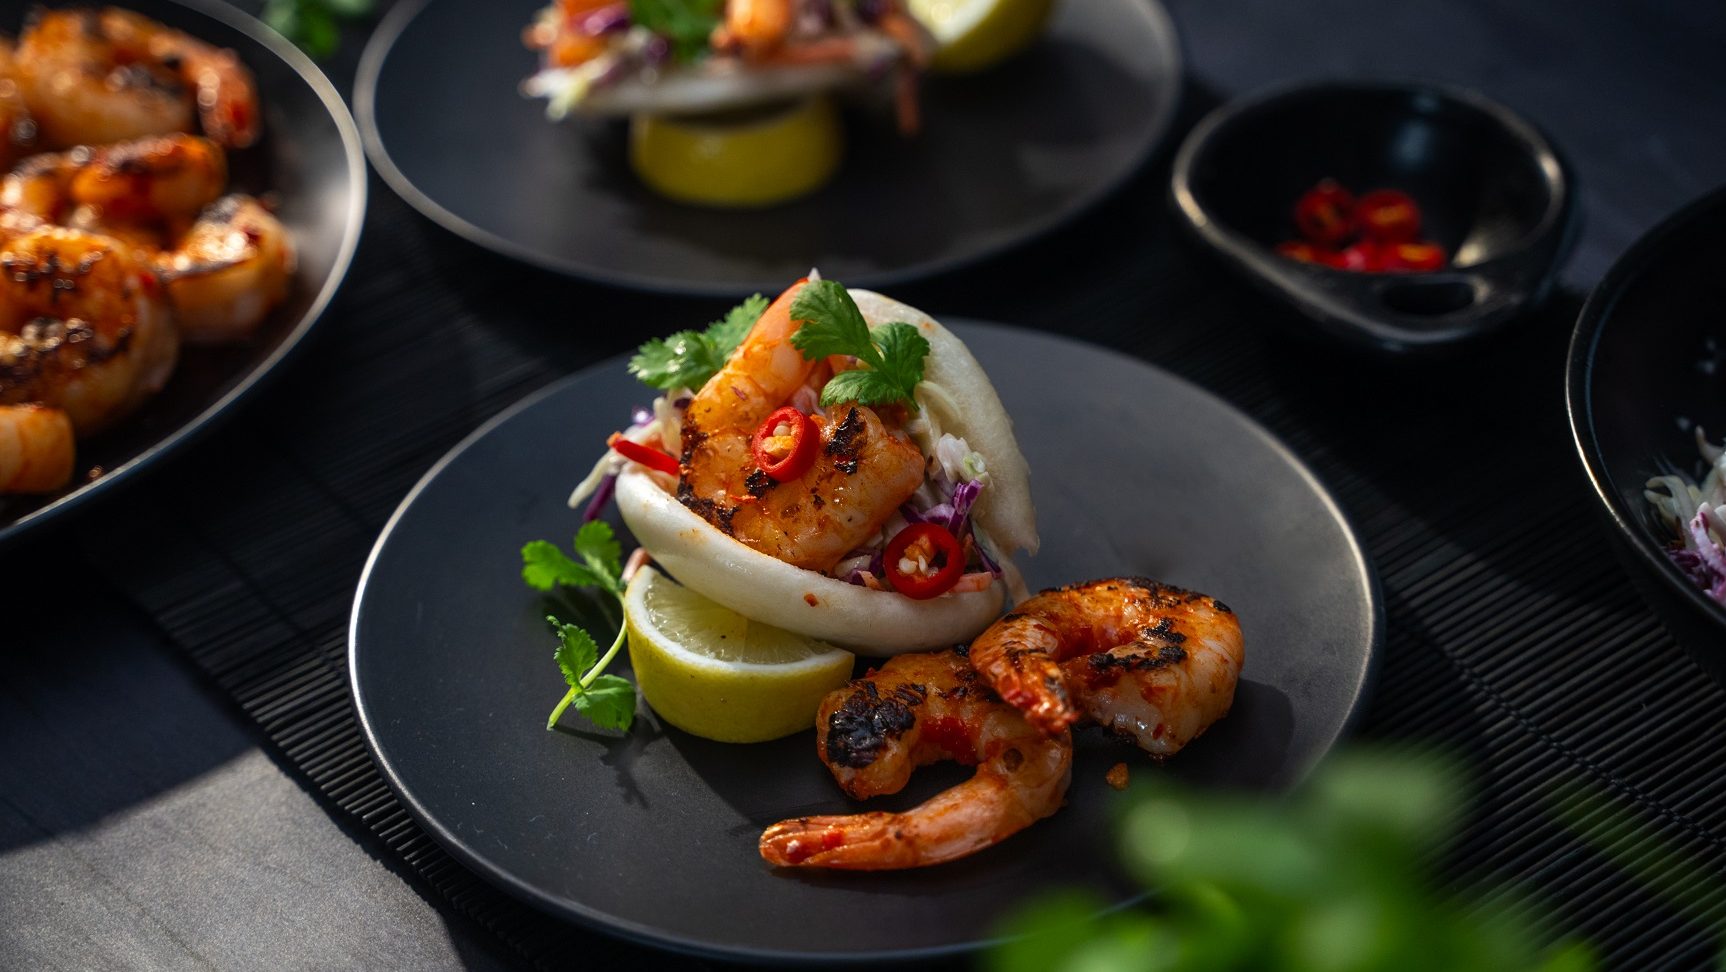 A red prawn and herb filled bao bun on a black plate with more prawns.